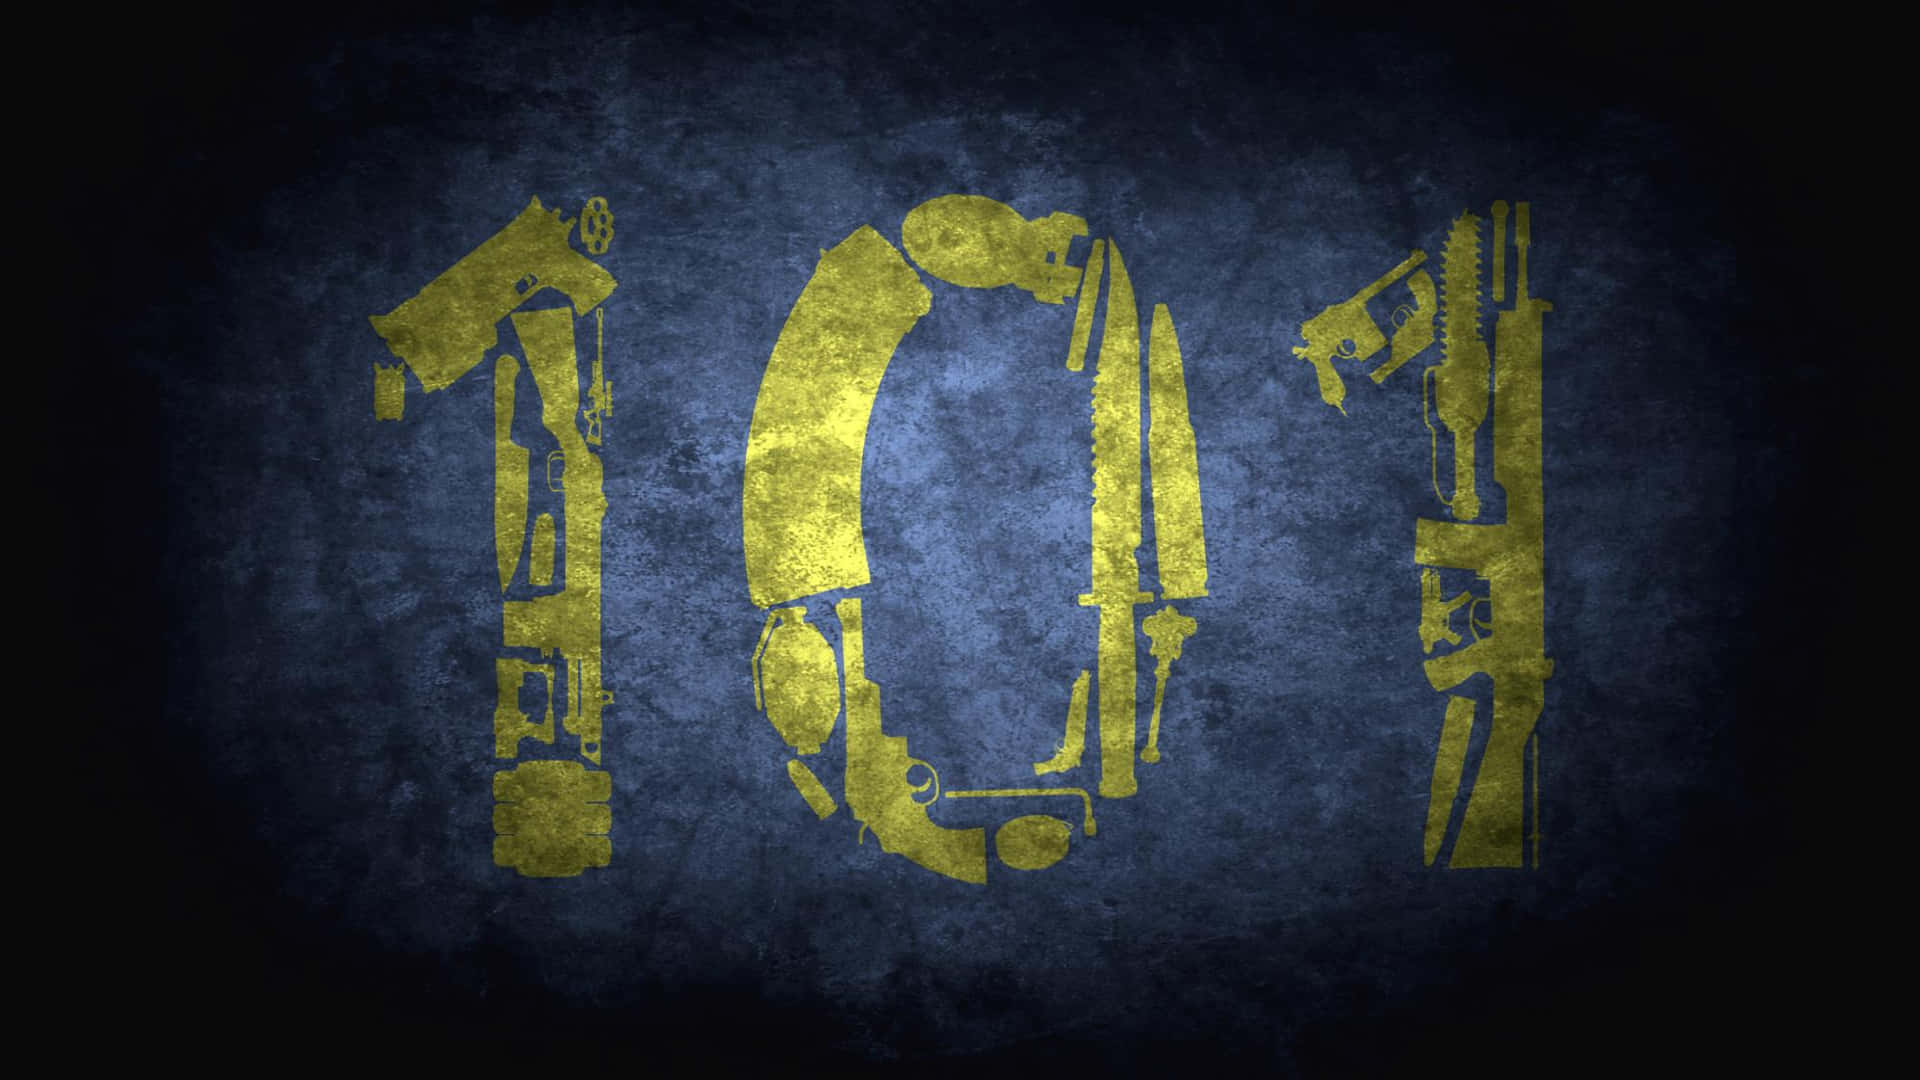 Vault 101 Entrance in Post-Apocalyptic World Wallpaper